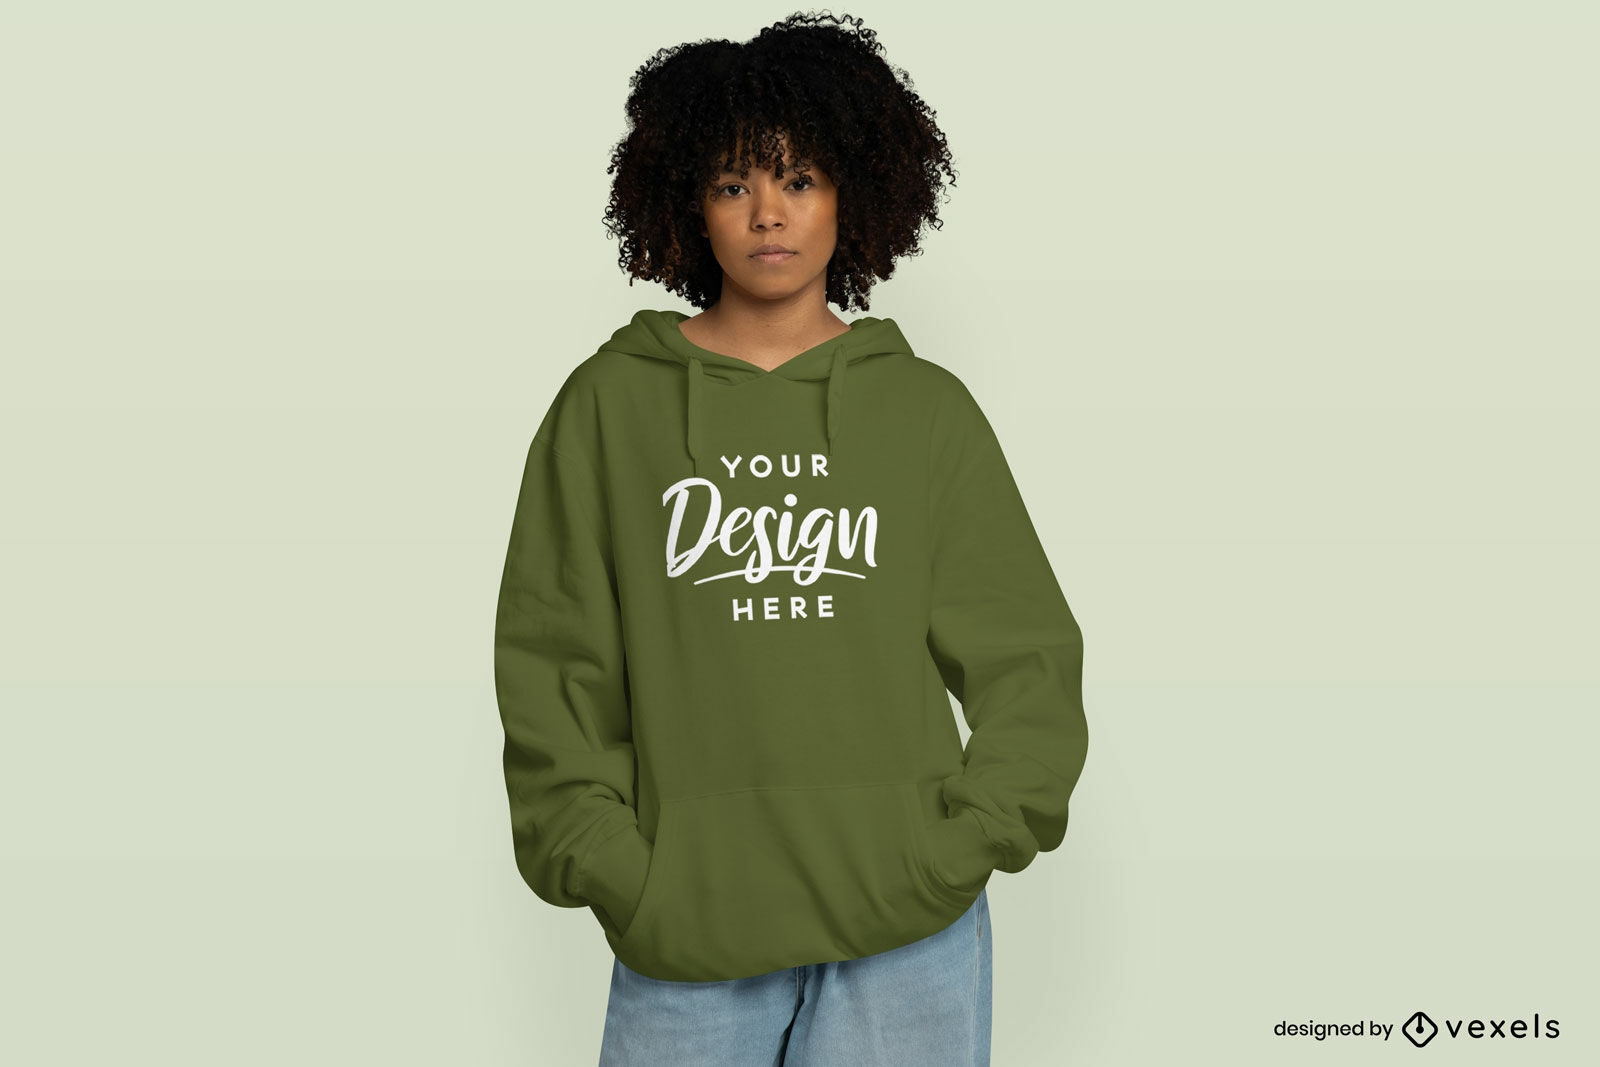 Black woman with afro in hoodie mockup